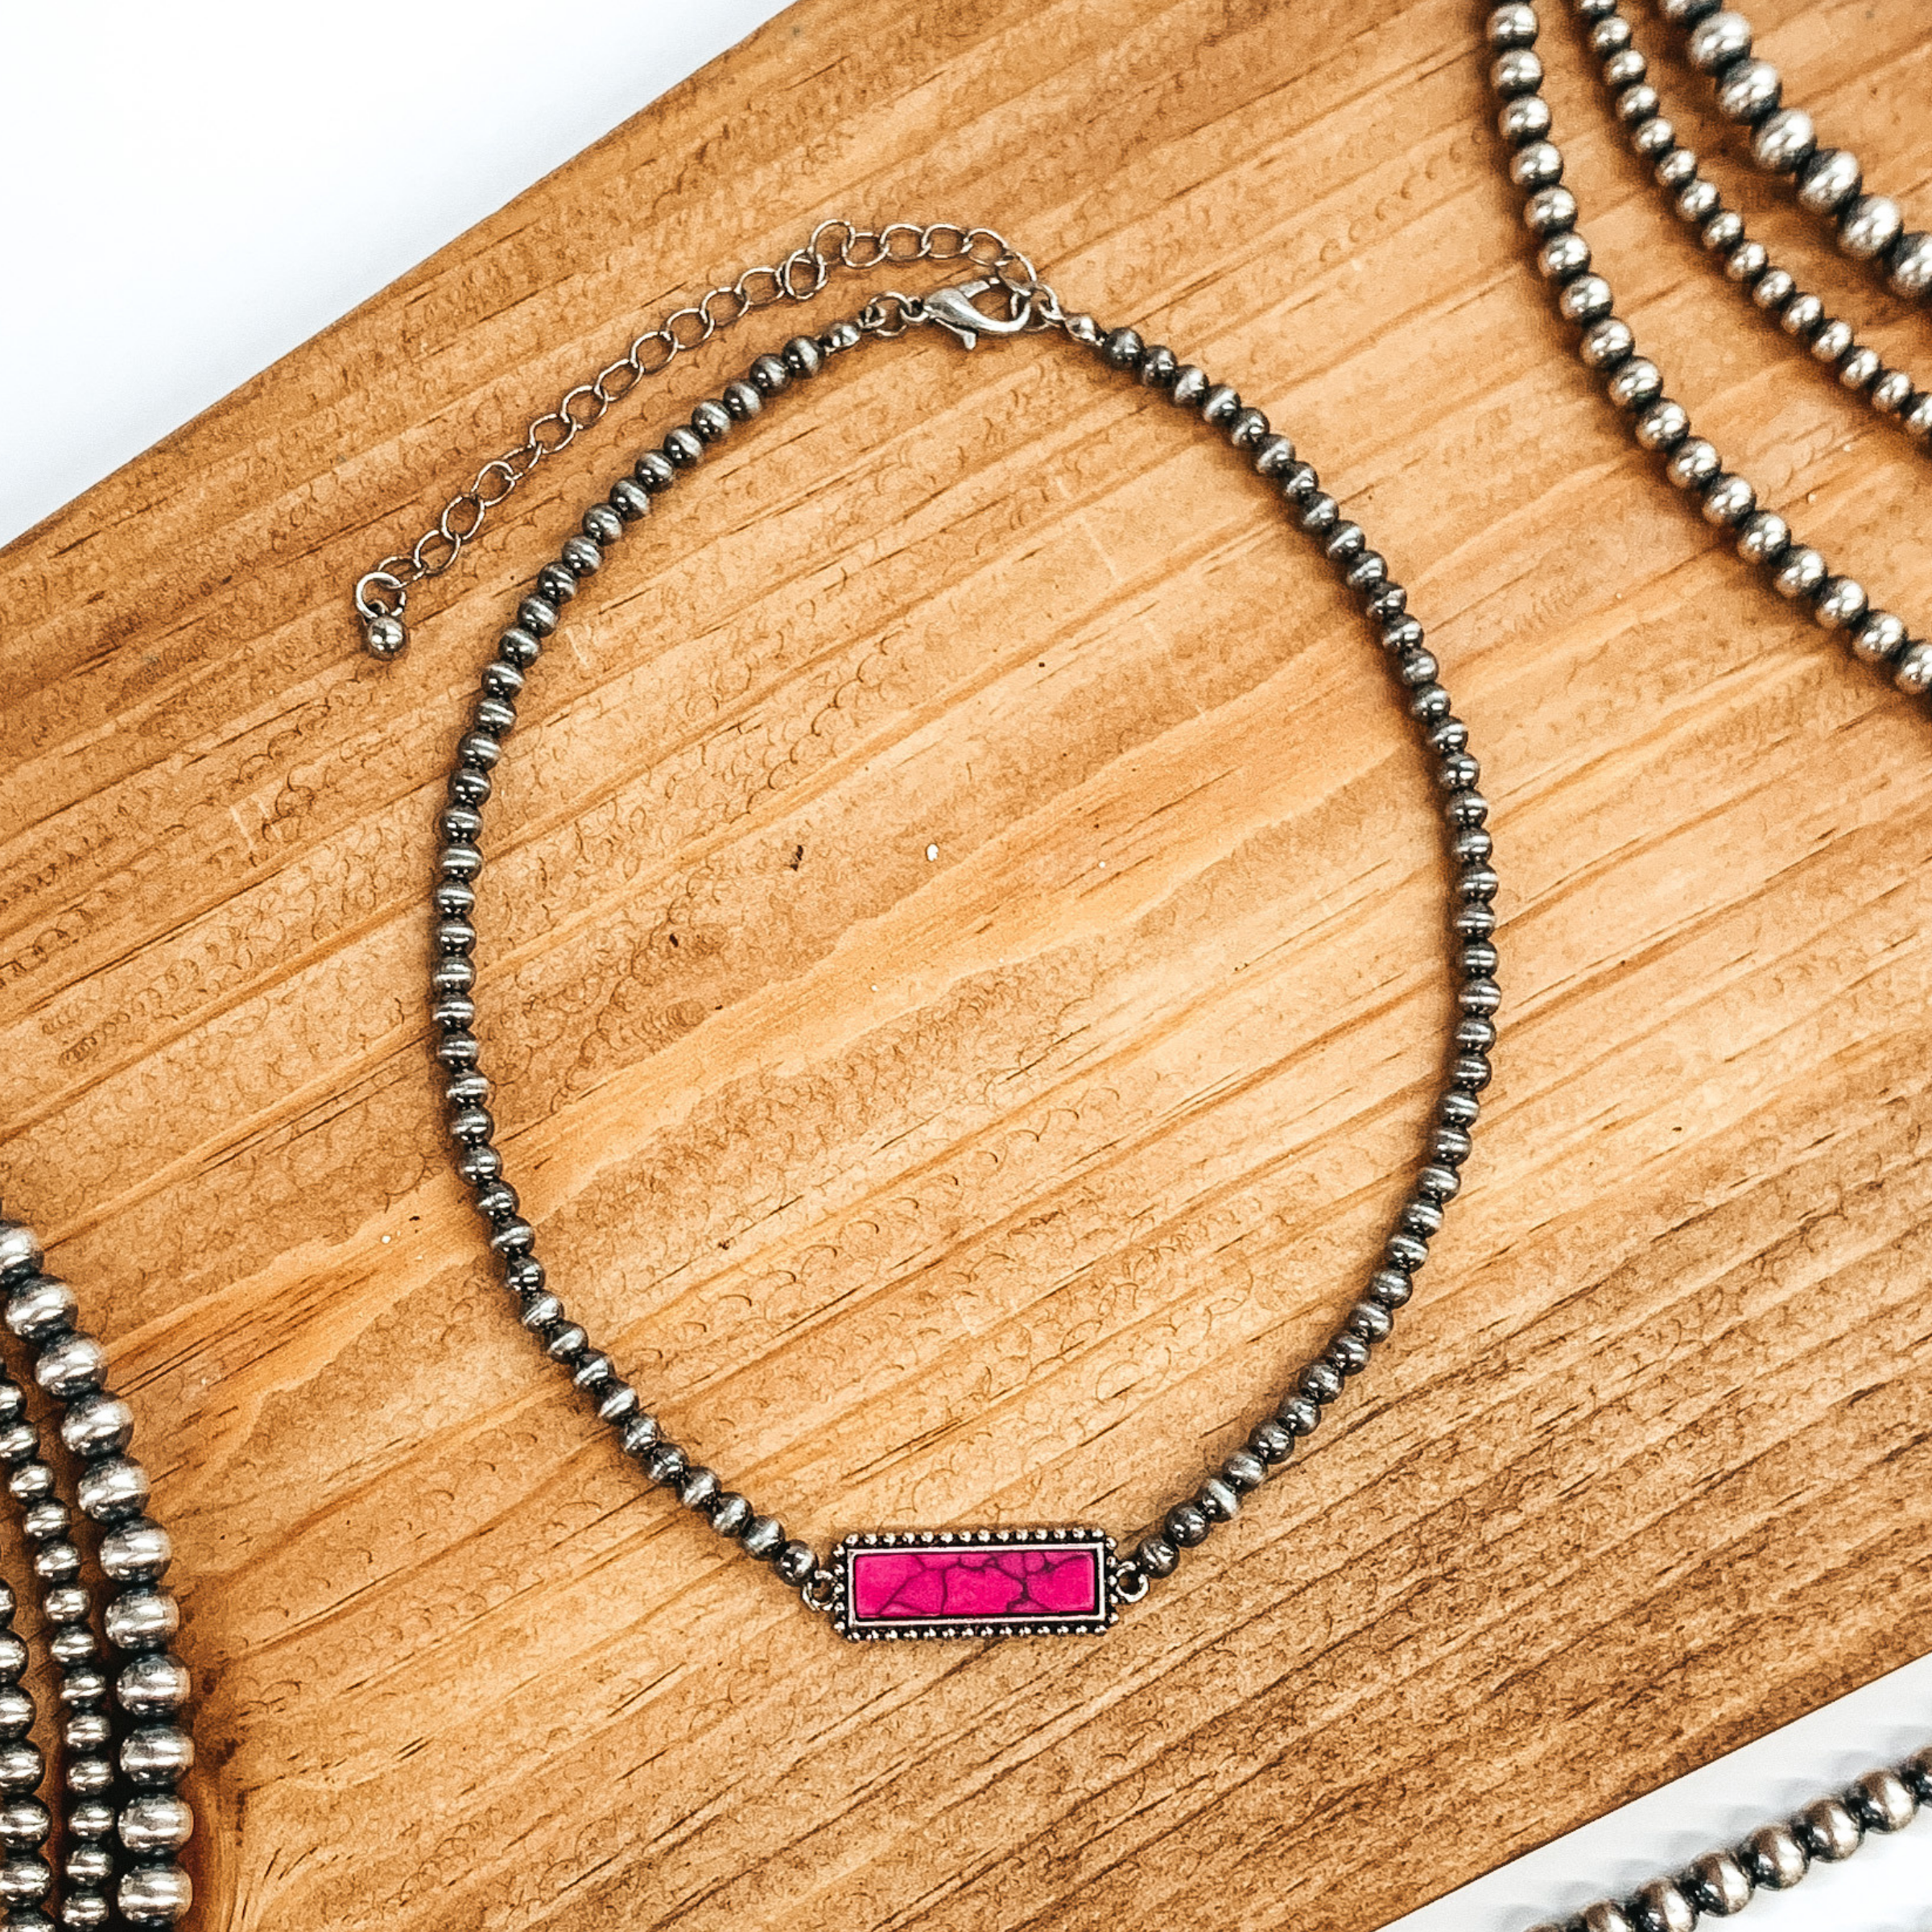 Navajo Inspired Choker with Bar Pendant in Pink - Giddy Up Glamour Boutique